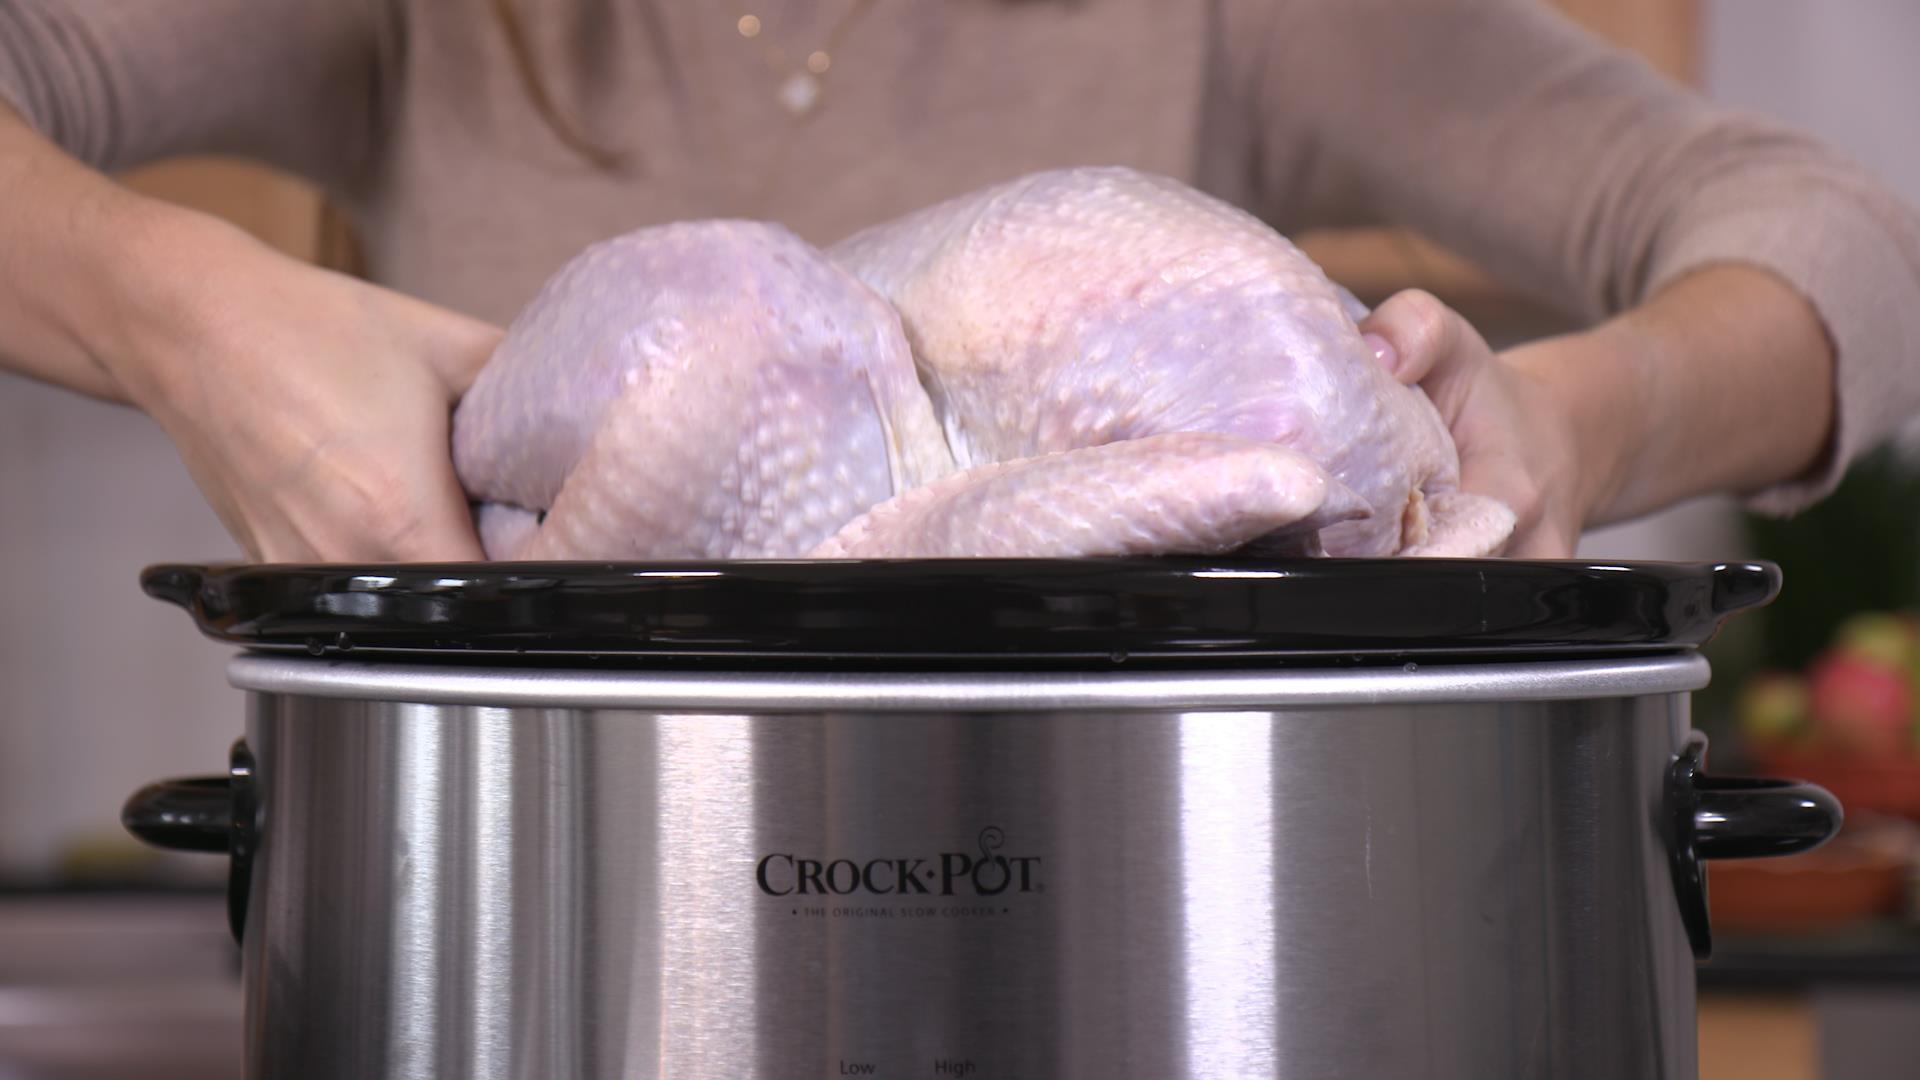 How To Safely Thaw A Frozen Turkey For Thanksgiving 2019,Chestnut Puree Woolworths